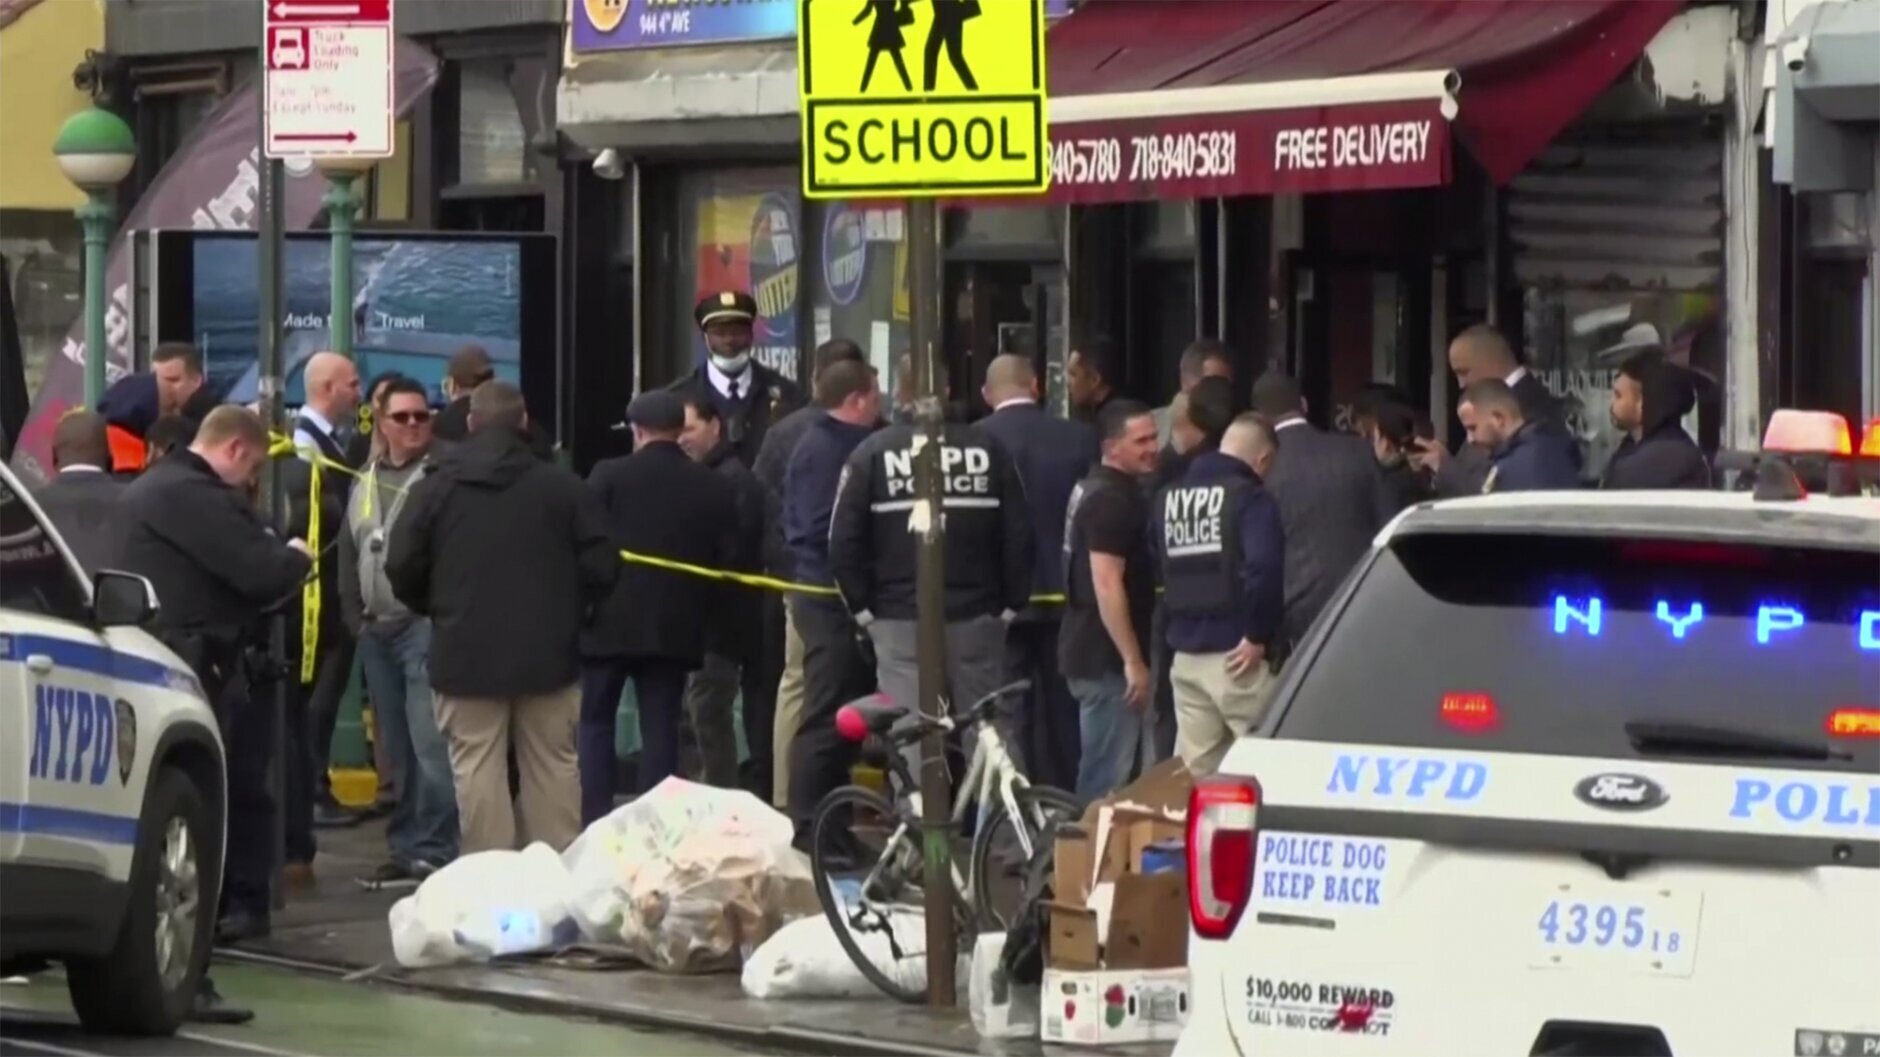 This still image provided by WABC shows law enforcement gathering at the scene of a shooting in the Brooklyn borough of New York on Tuesday, April 12, 2022.  Law enforcement sources say five people were shot  at a subway station in Brooklyn . Fire personnel responding to reports of smoke Tuesday morning at the 36th Street station in Sunset Park found multiple people shot and unexploded devices. (WABC via AP)